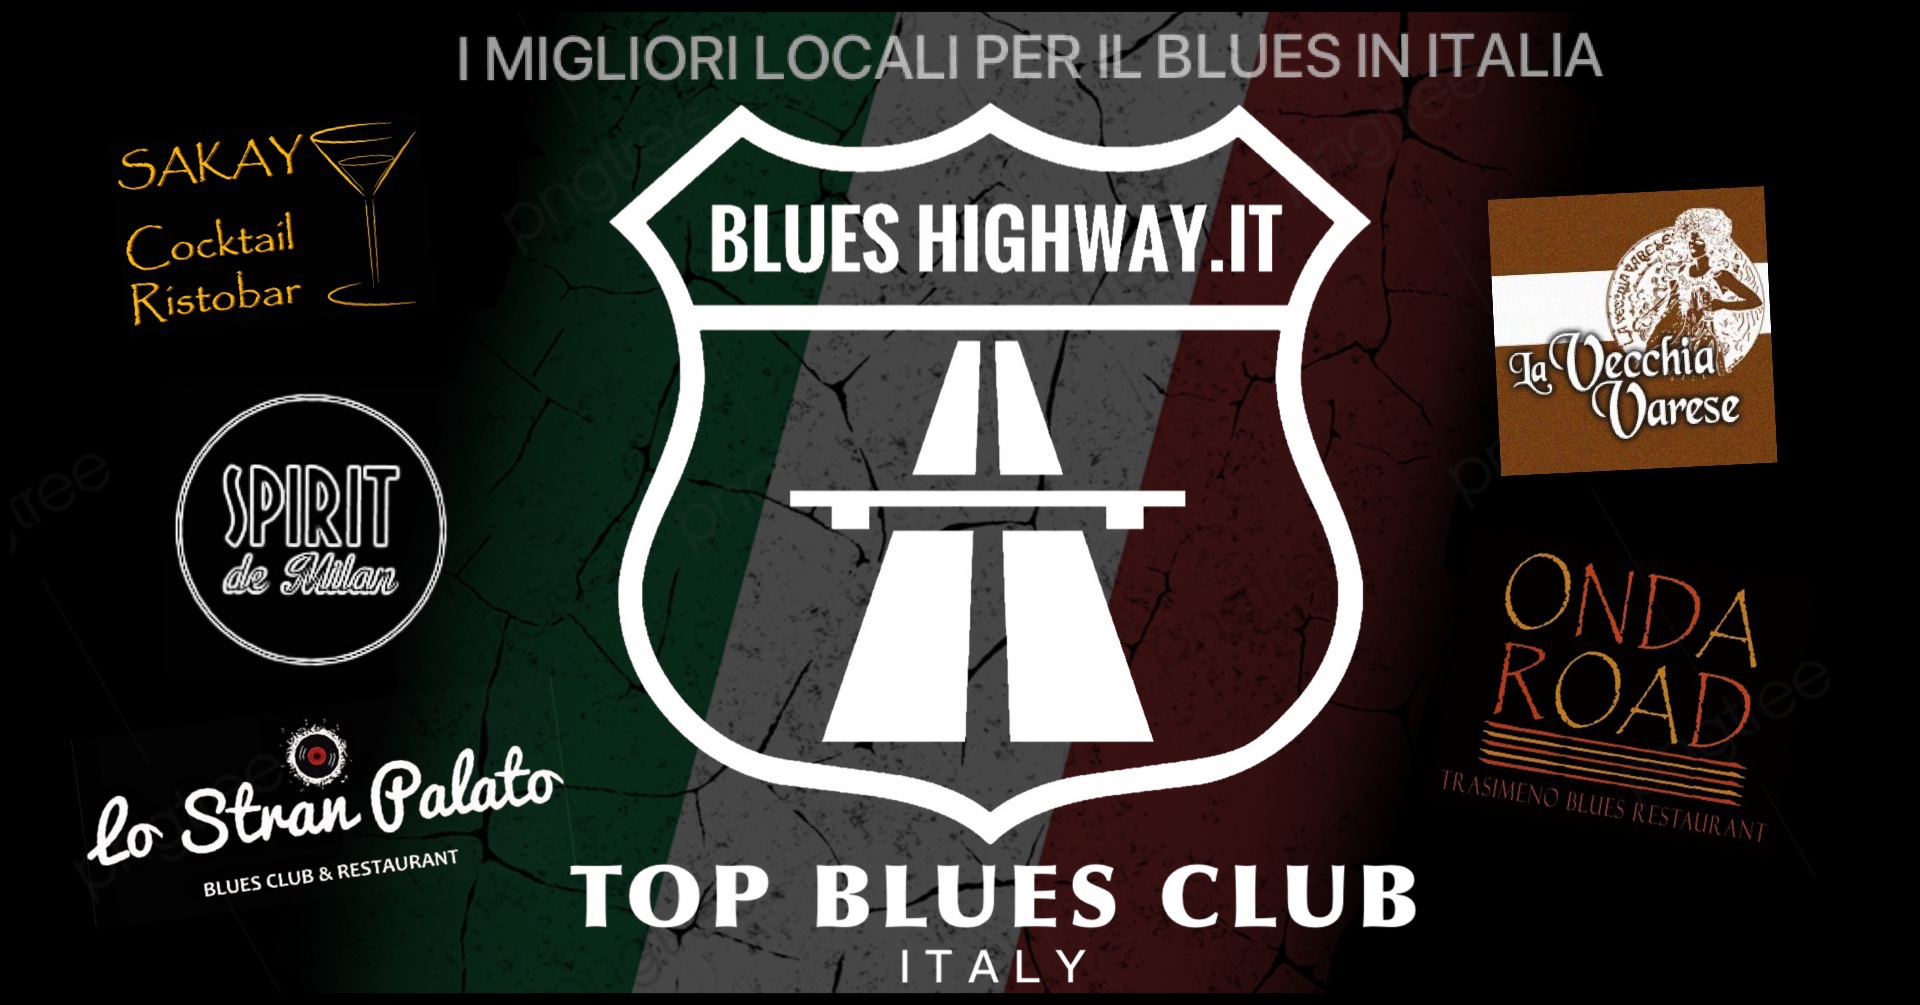 TOP BLUES CLUB - ITALY EVENTS